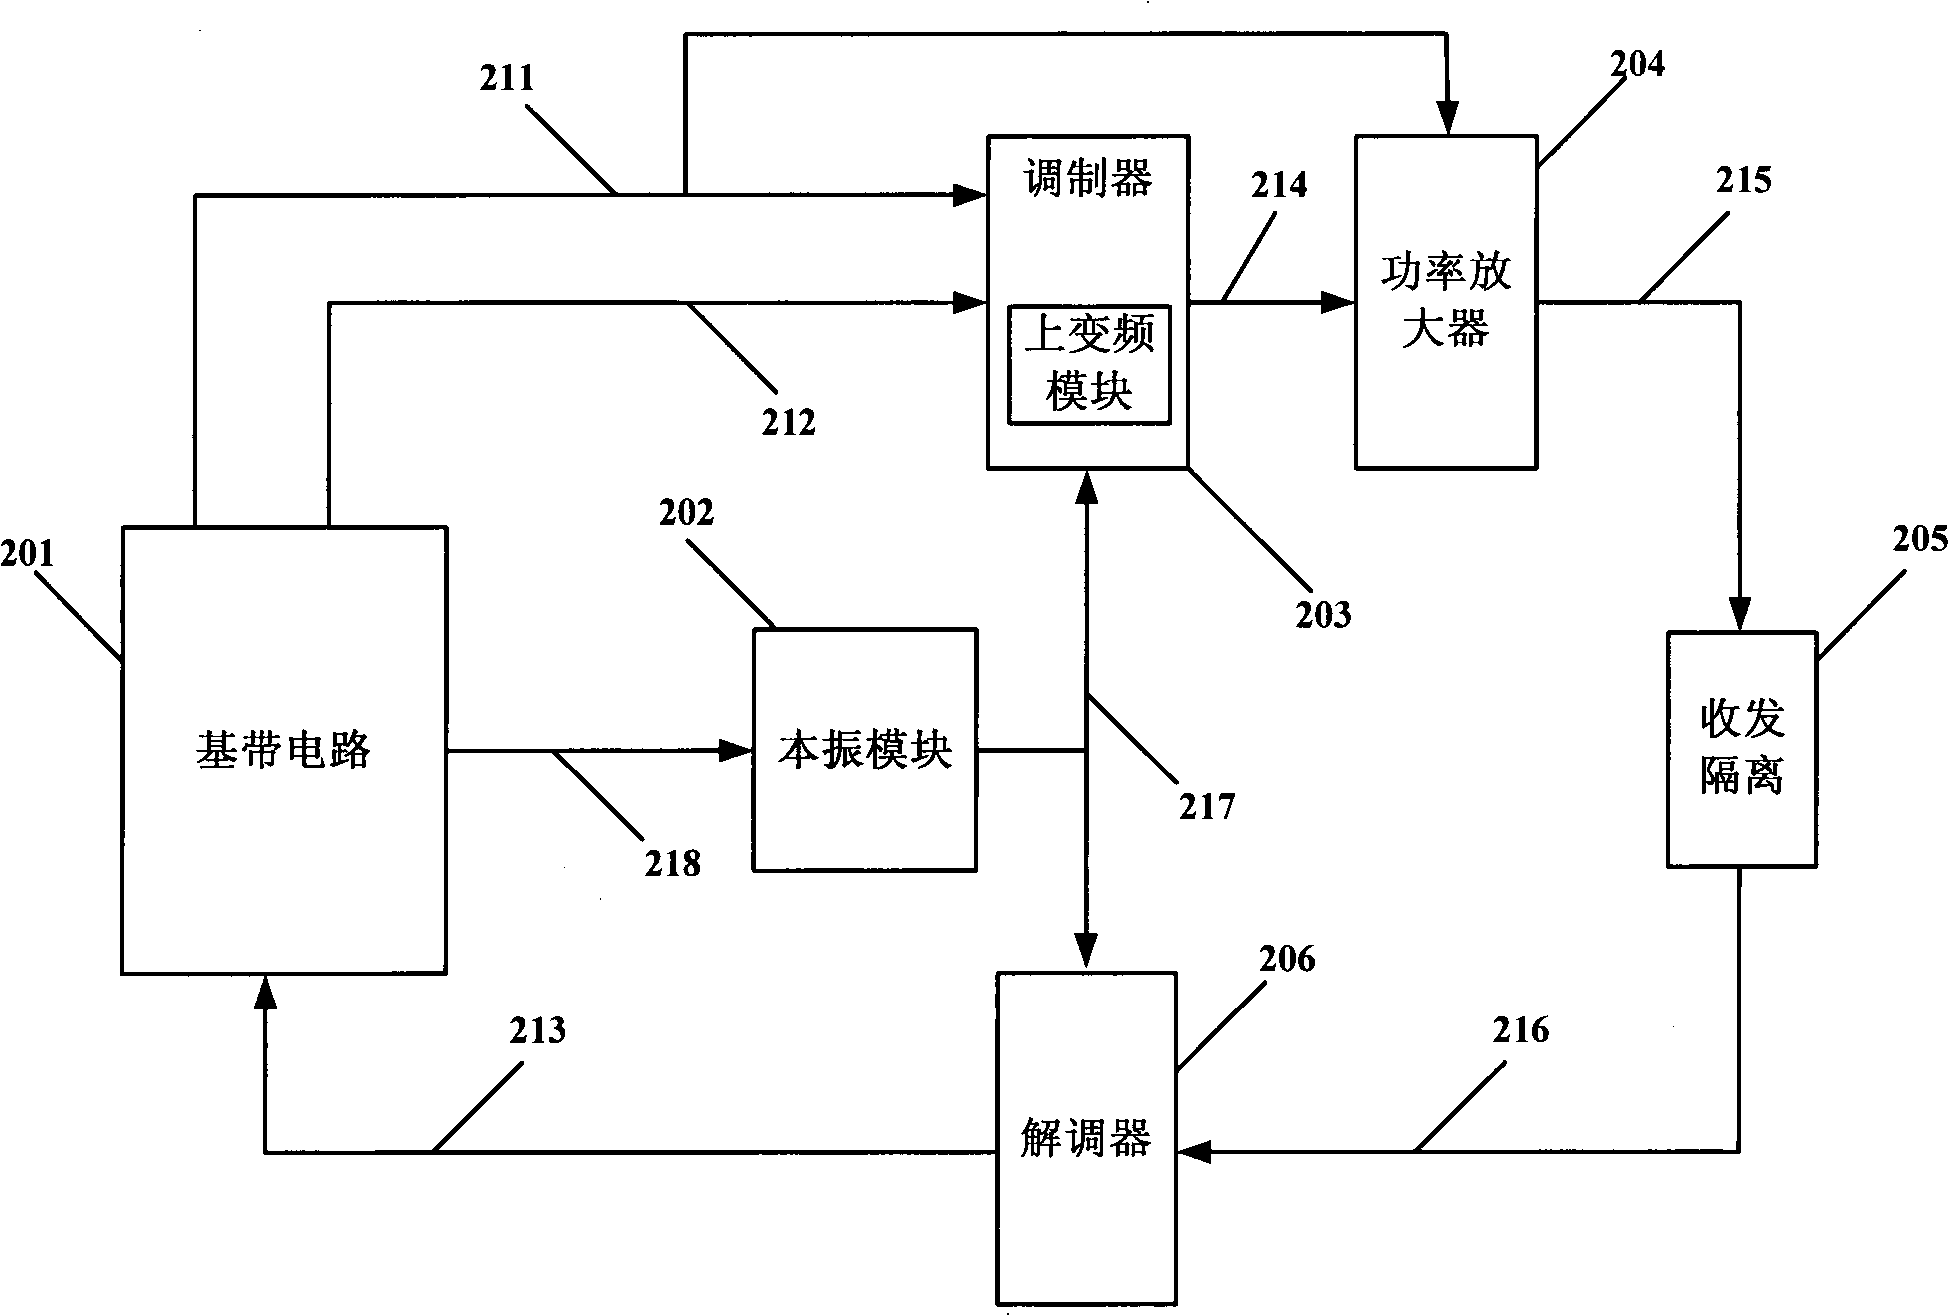 Method for preventing interception in radio frequency recognition system using back-scattering modulation technique